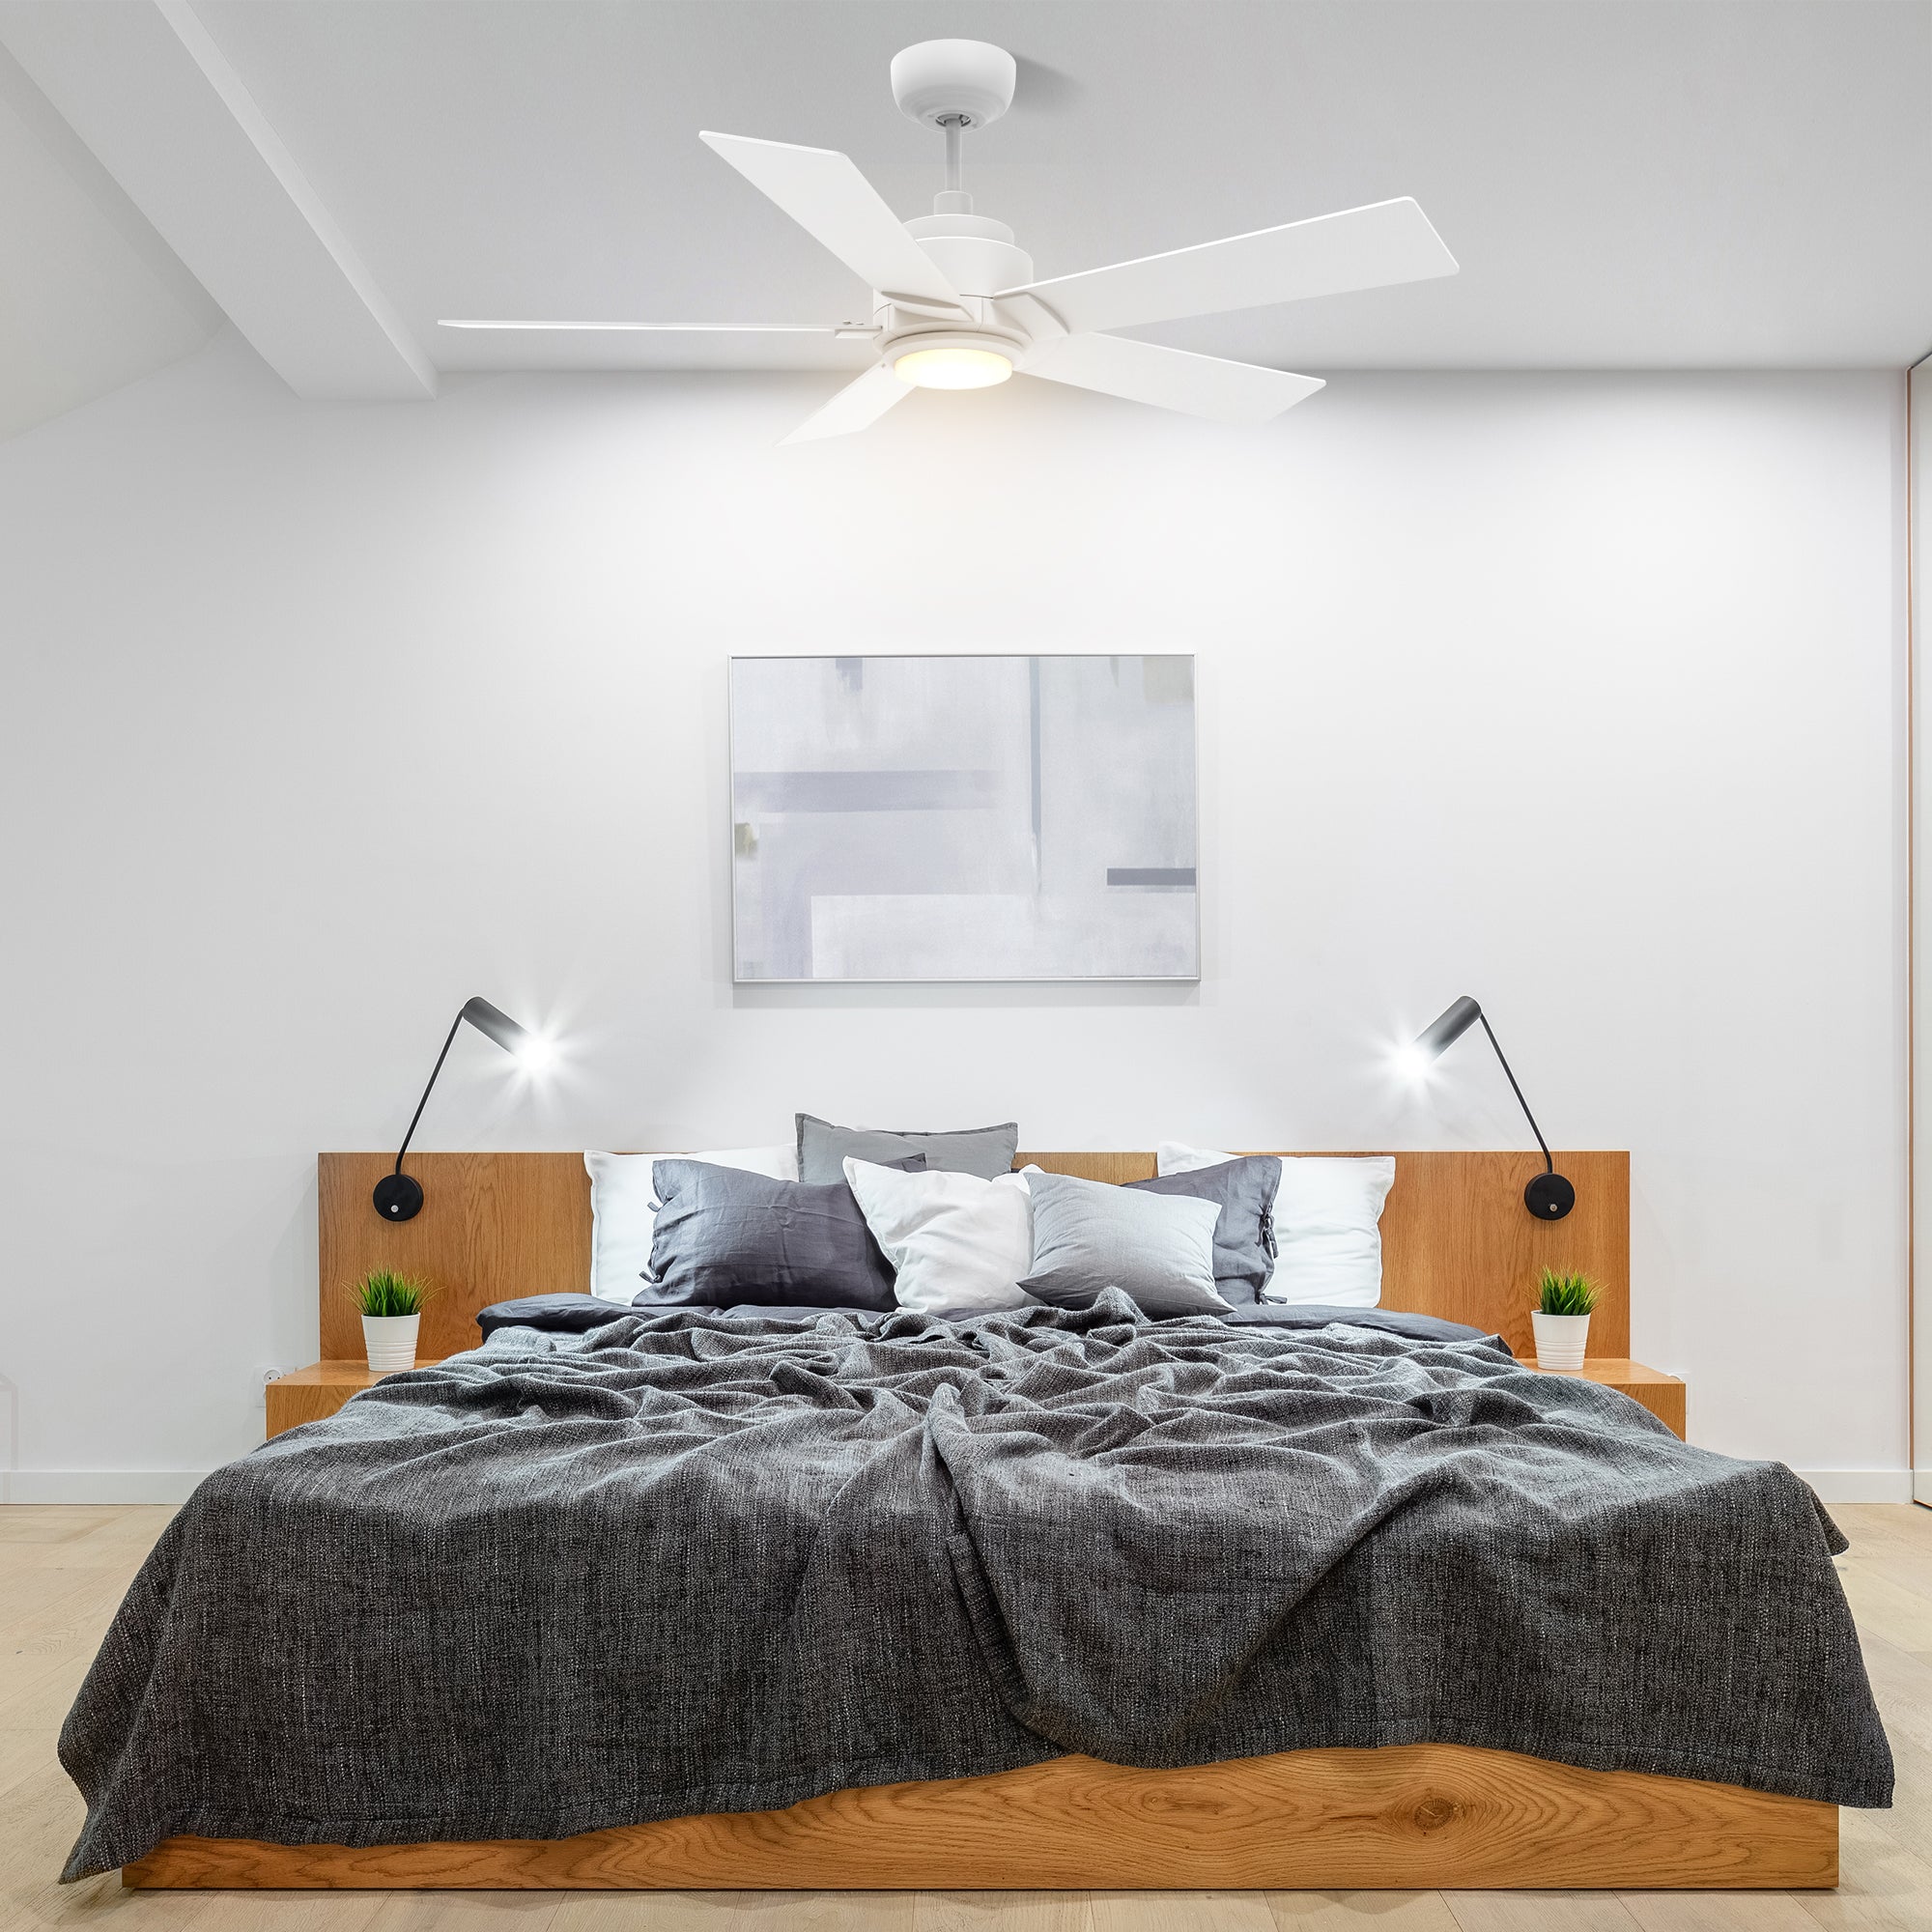 This Aspen 60'' smart ceiling fan keeps your space cool, bright, and stylish. It is a soft modern masterpiece perfect for your large indoor living spaces. This Wifi smart ceiling fan is a simplicity designing with White finish, use elegant Plywood blades and has an integrated 4000K LED cool light. The fan features Remote control, Wi-Fi apps, Siri Shortcut and Voice control technology (compatible with Amazon Alexa and Google Home Assistant ) to set fan preferences. #color_white